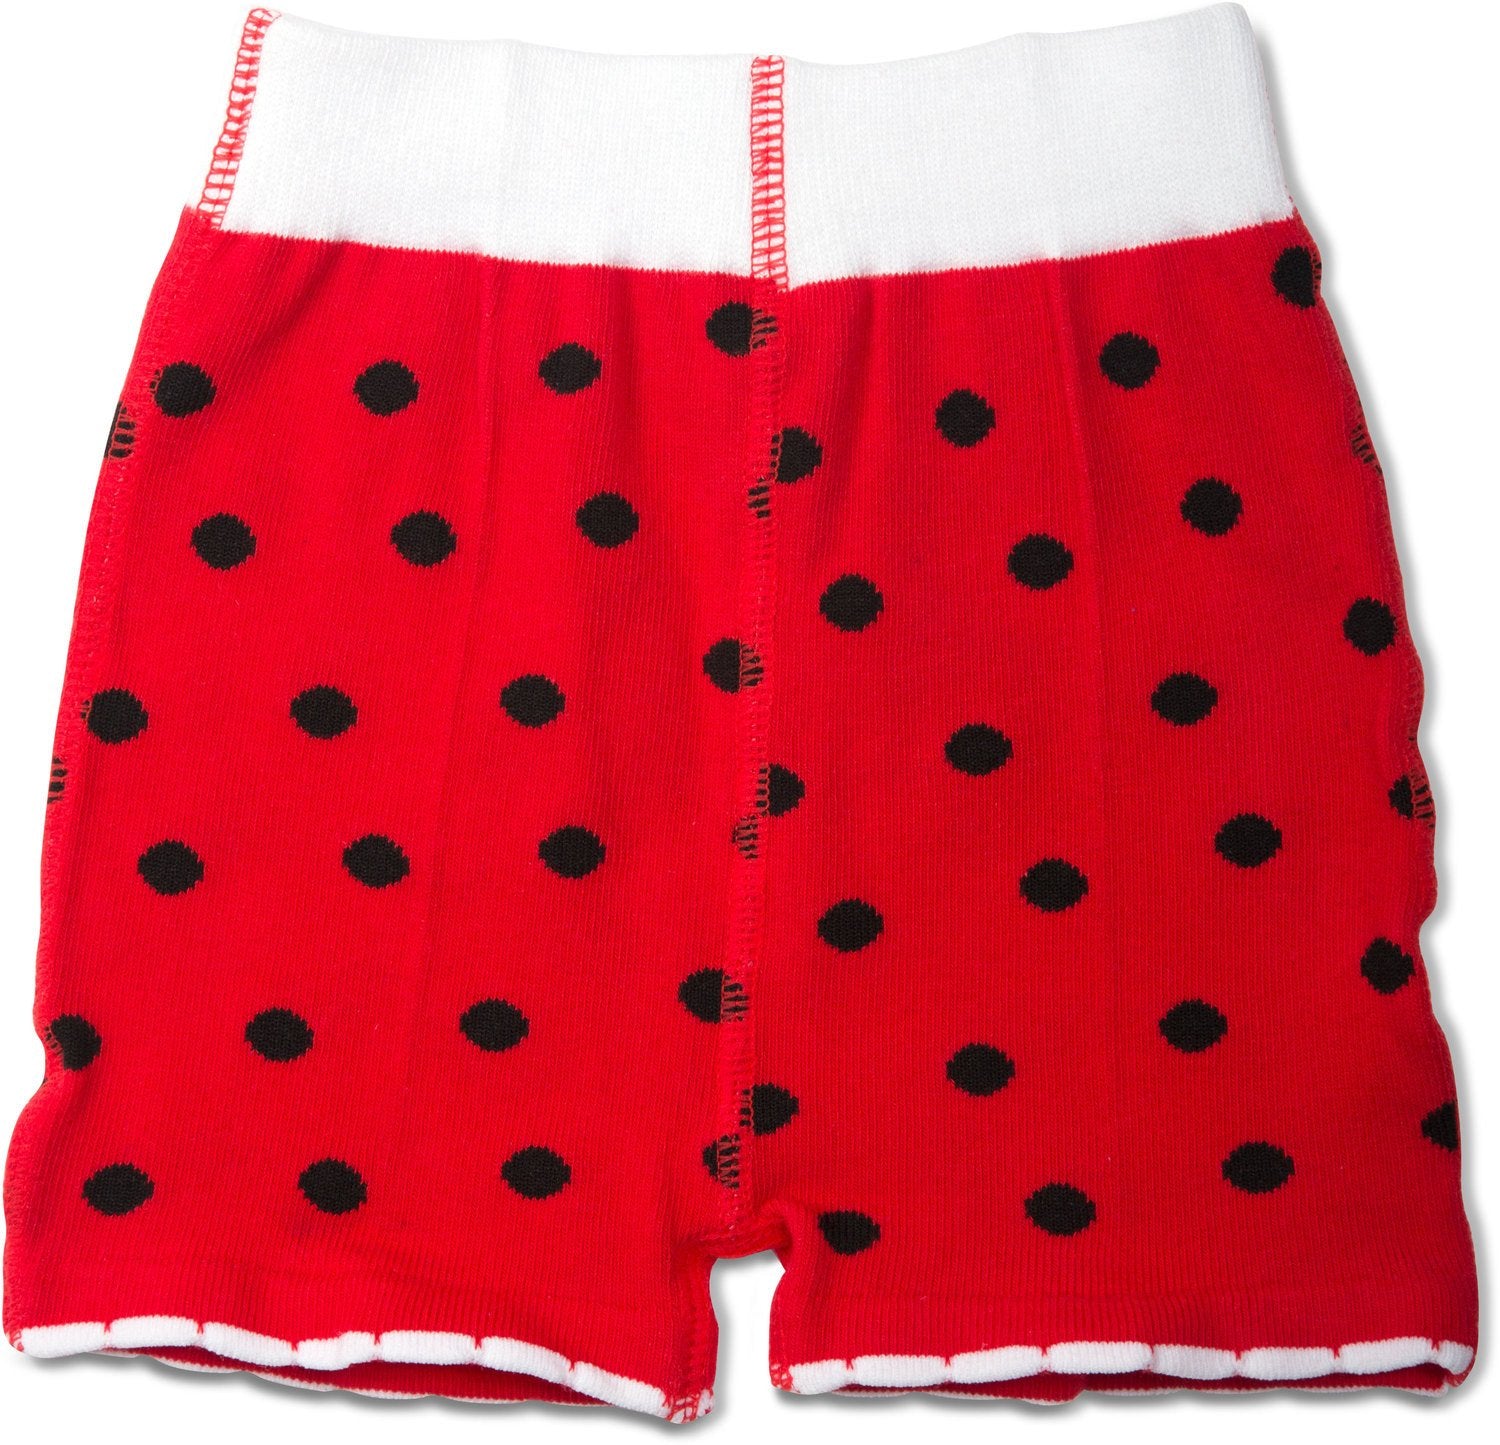 Red and Black Ladybug Baby Shorts Baby Shorts Izzy & Owie - GigglesGear.com